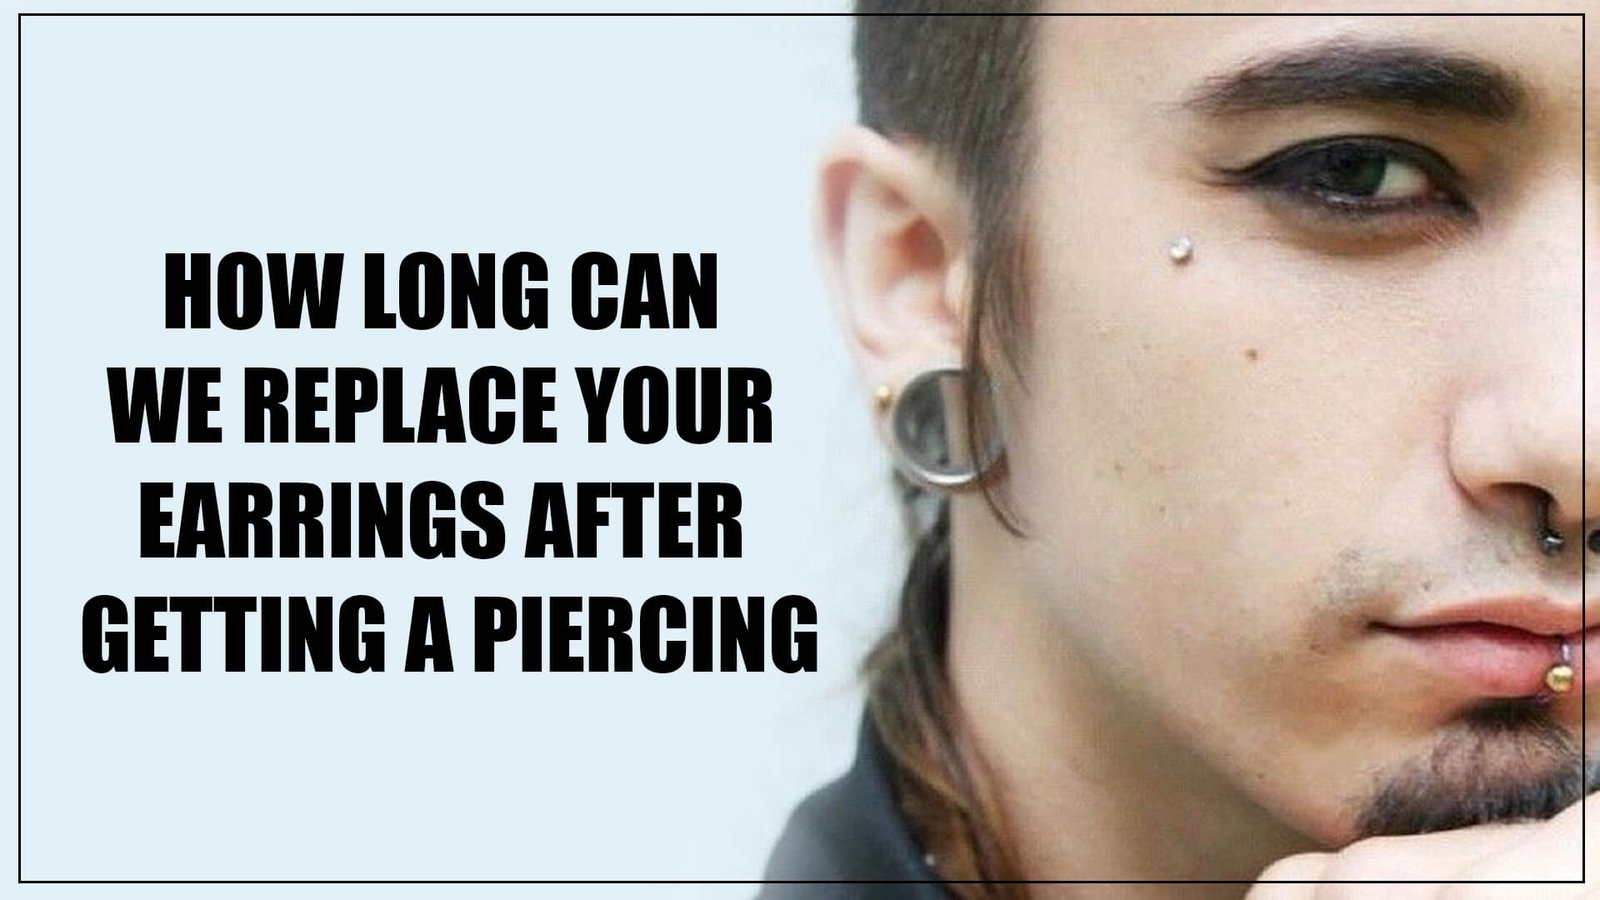 How Long Can We Replace Your Earrings After Getting a Piercing